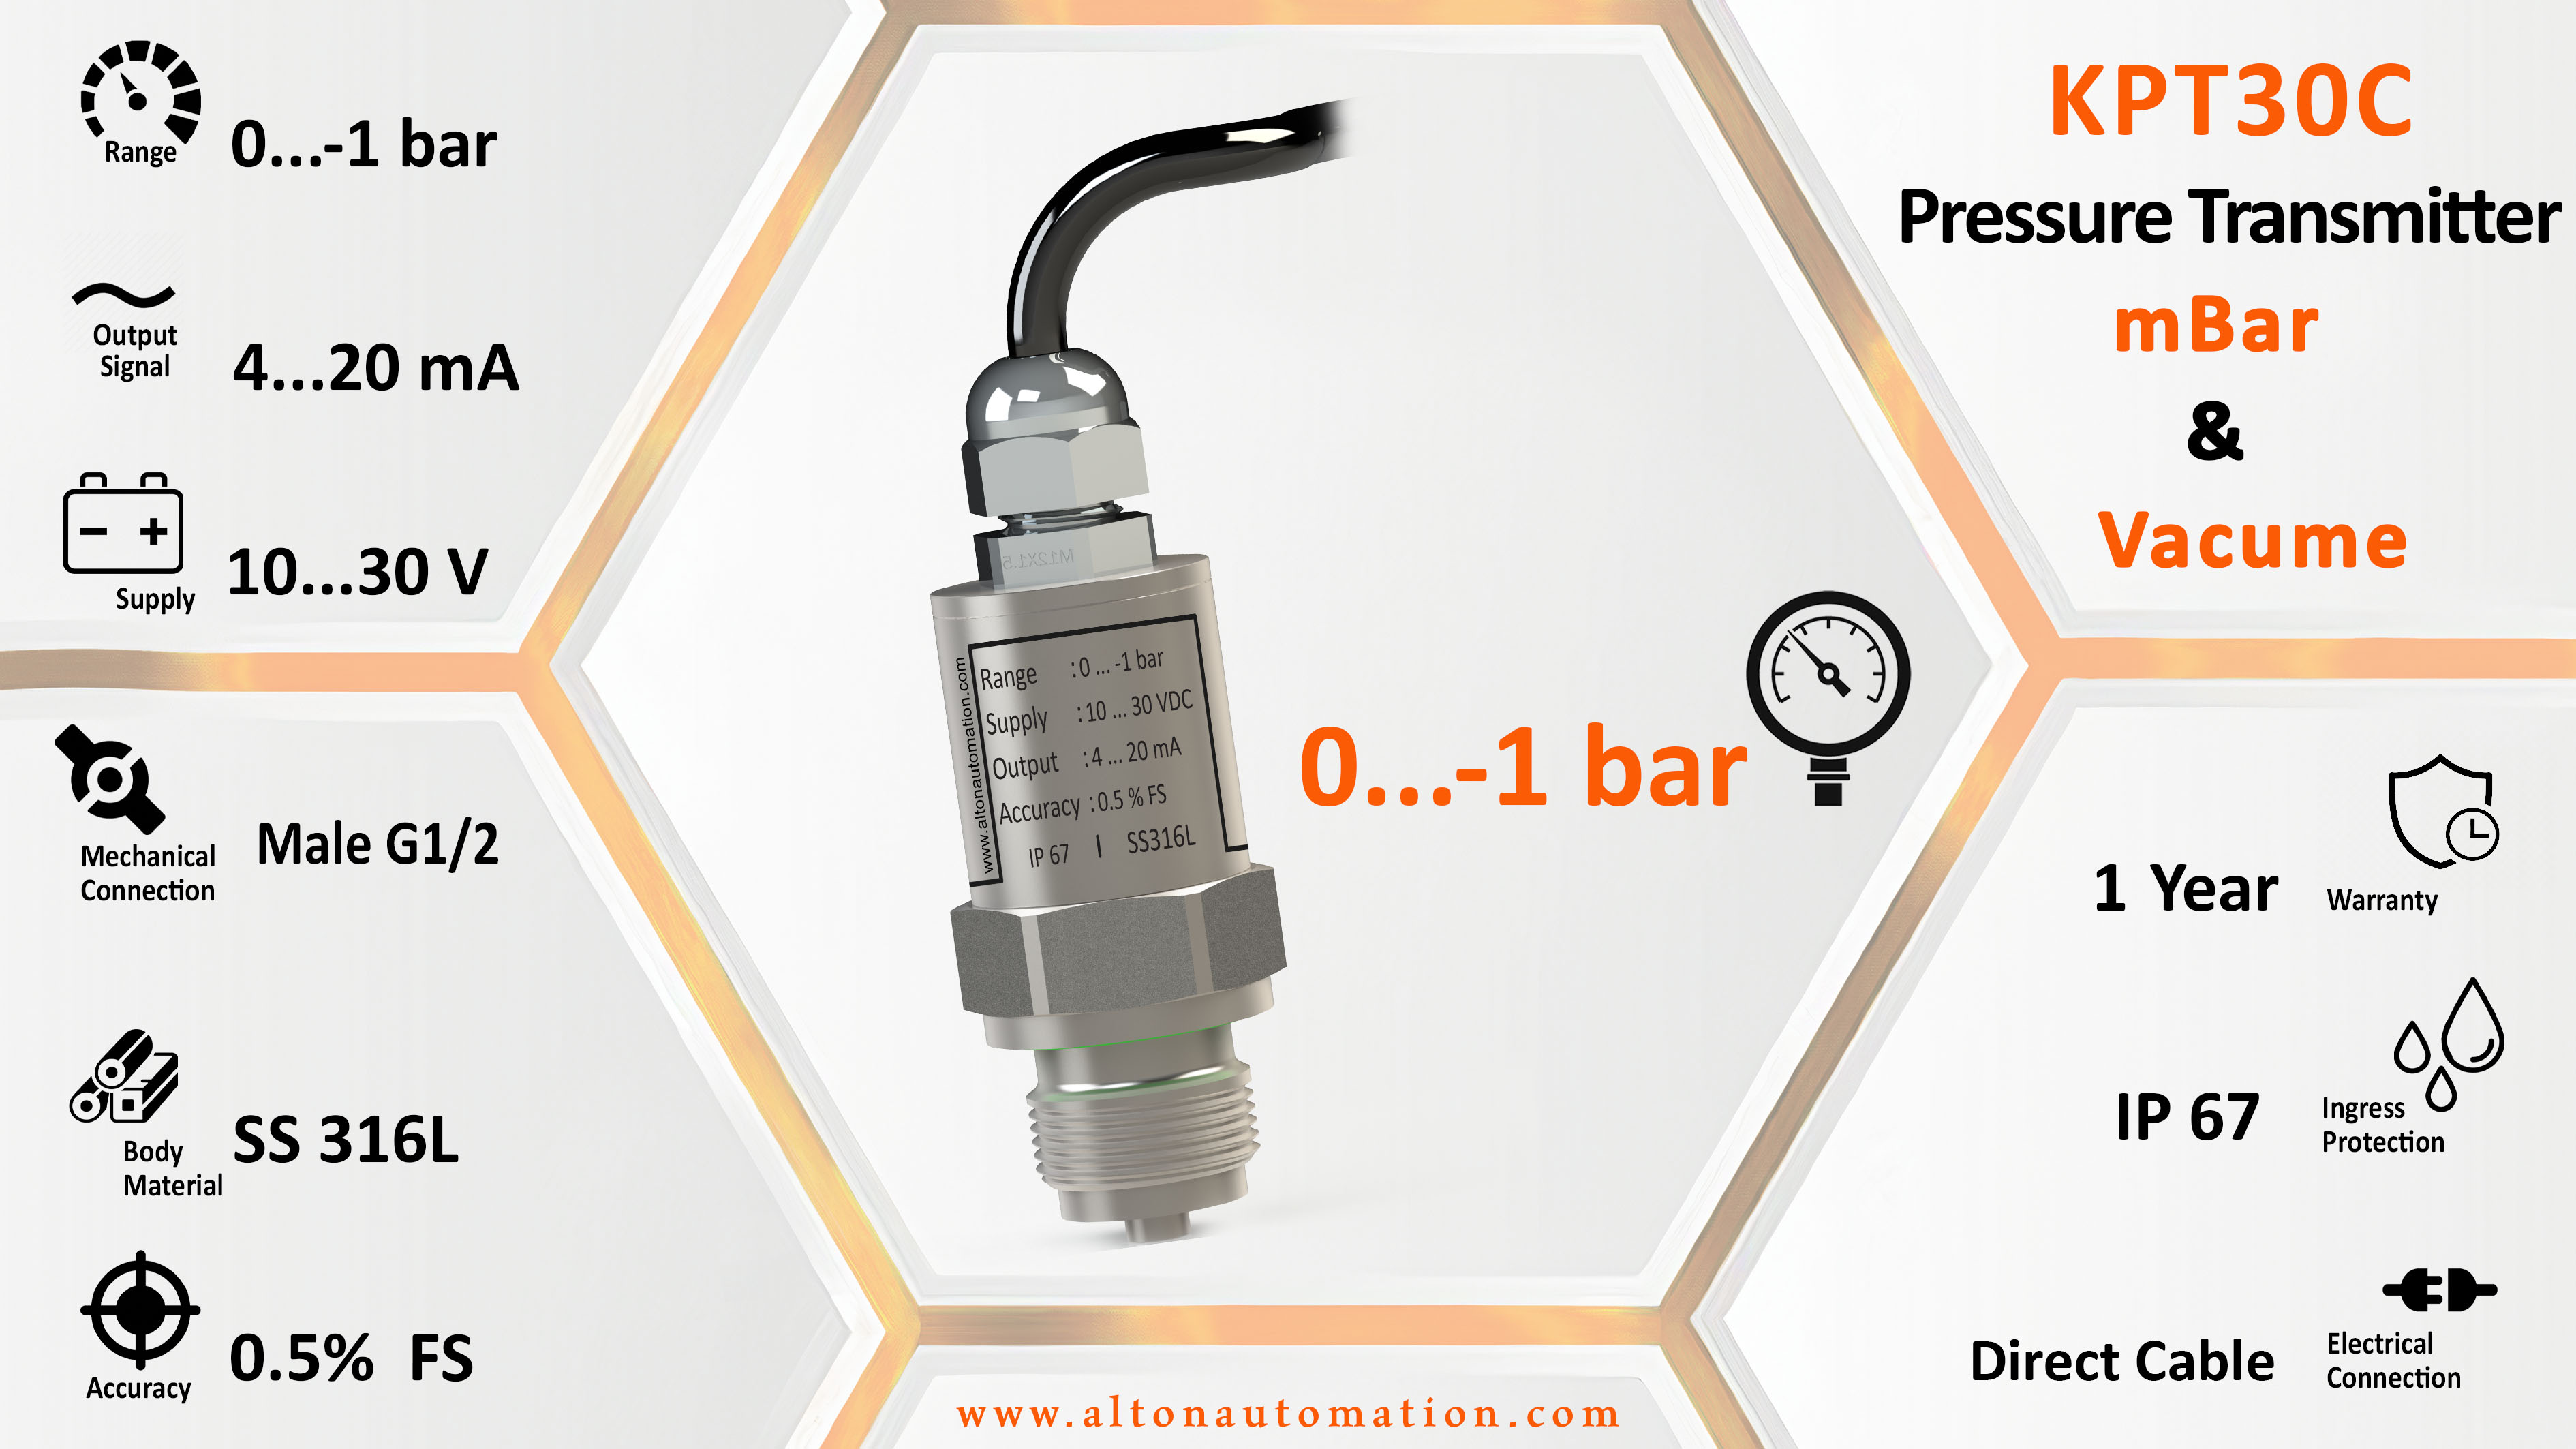 Pressure Transmitter for mbar and vacume_KPT30C-0V1-C1-MG2_image_2